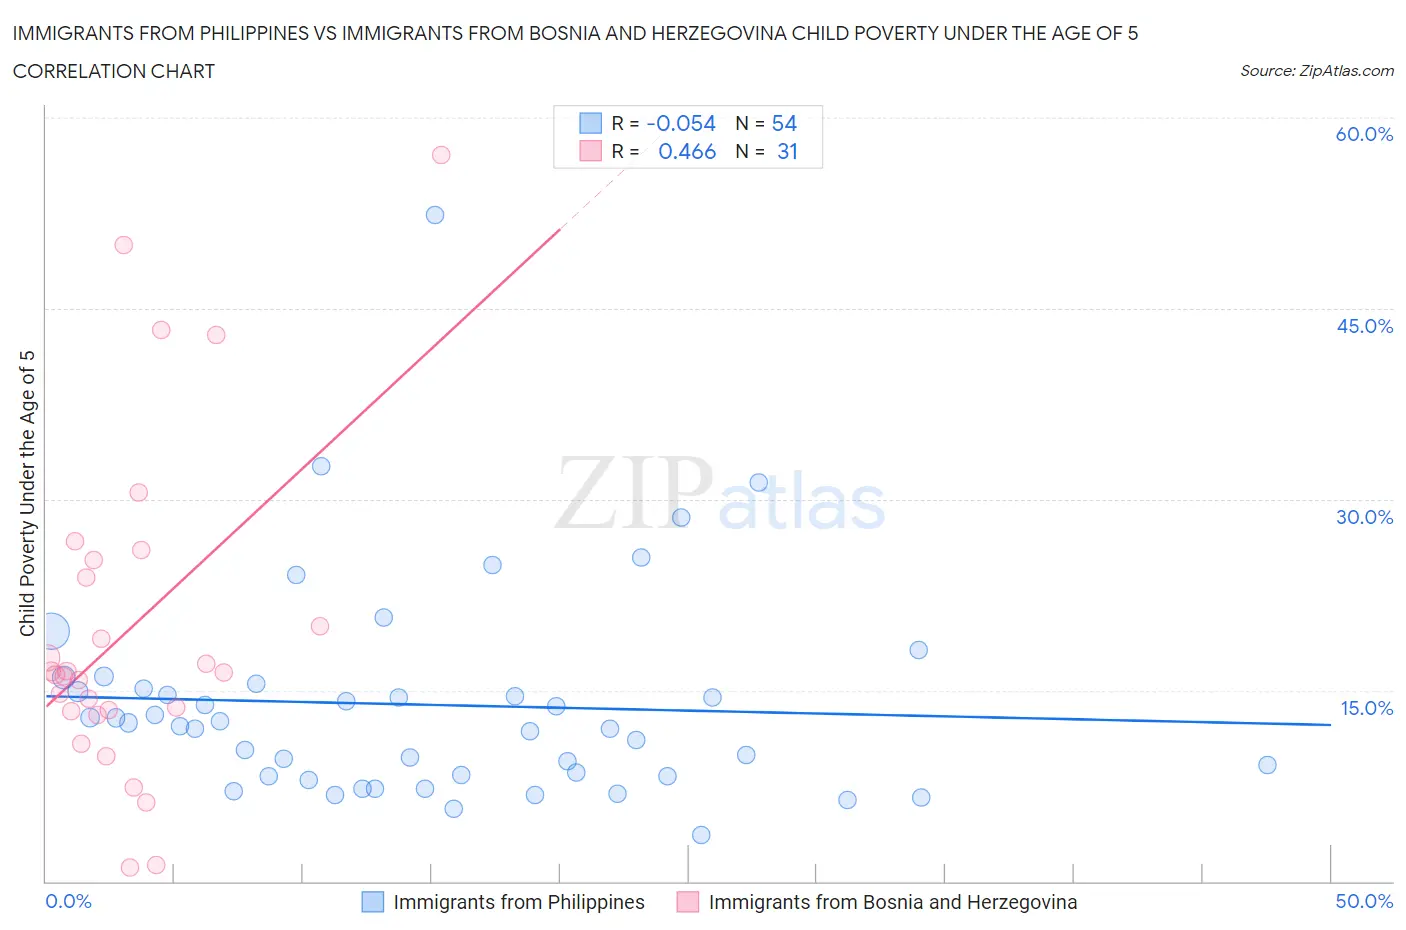 Immigrants from Philippines vs Immigrants from Bosnia and Herzegovina Child Poverty Under the Age of 5